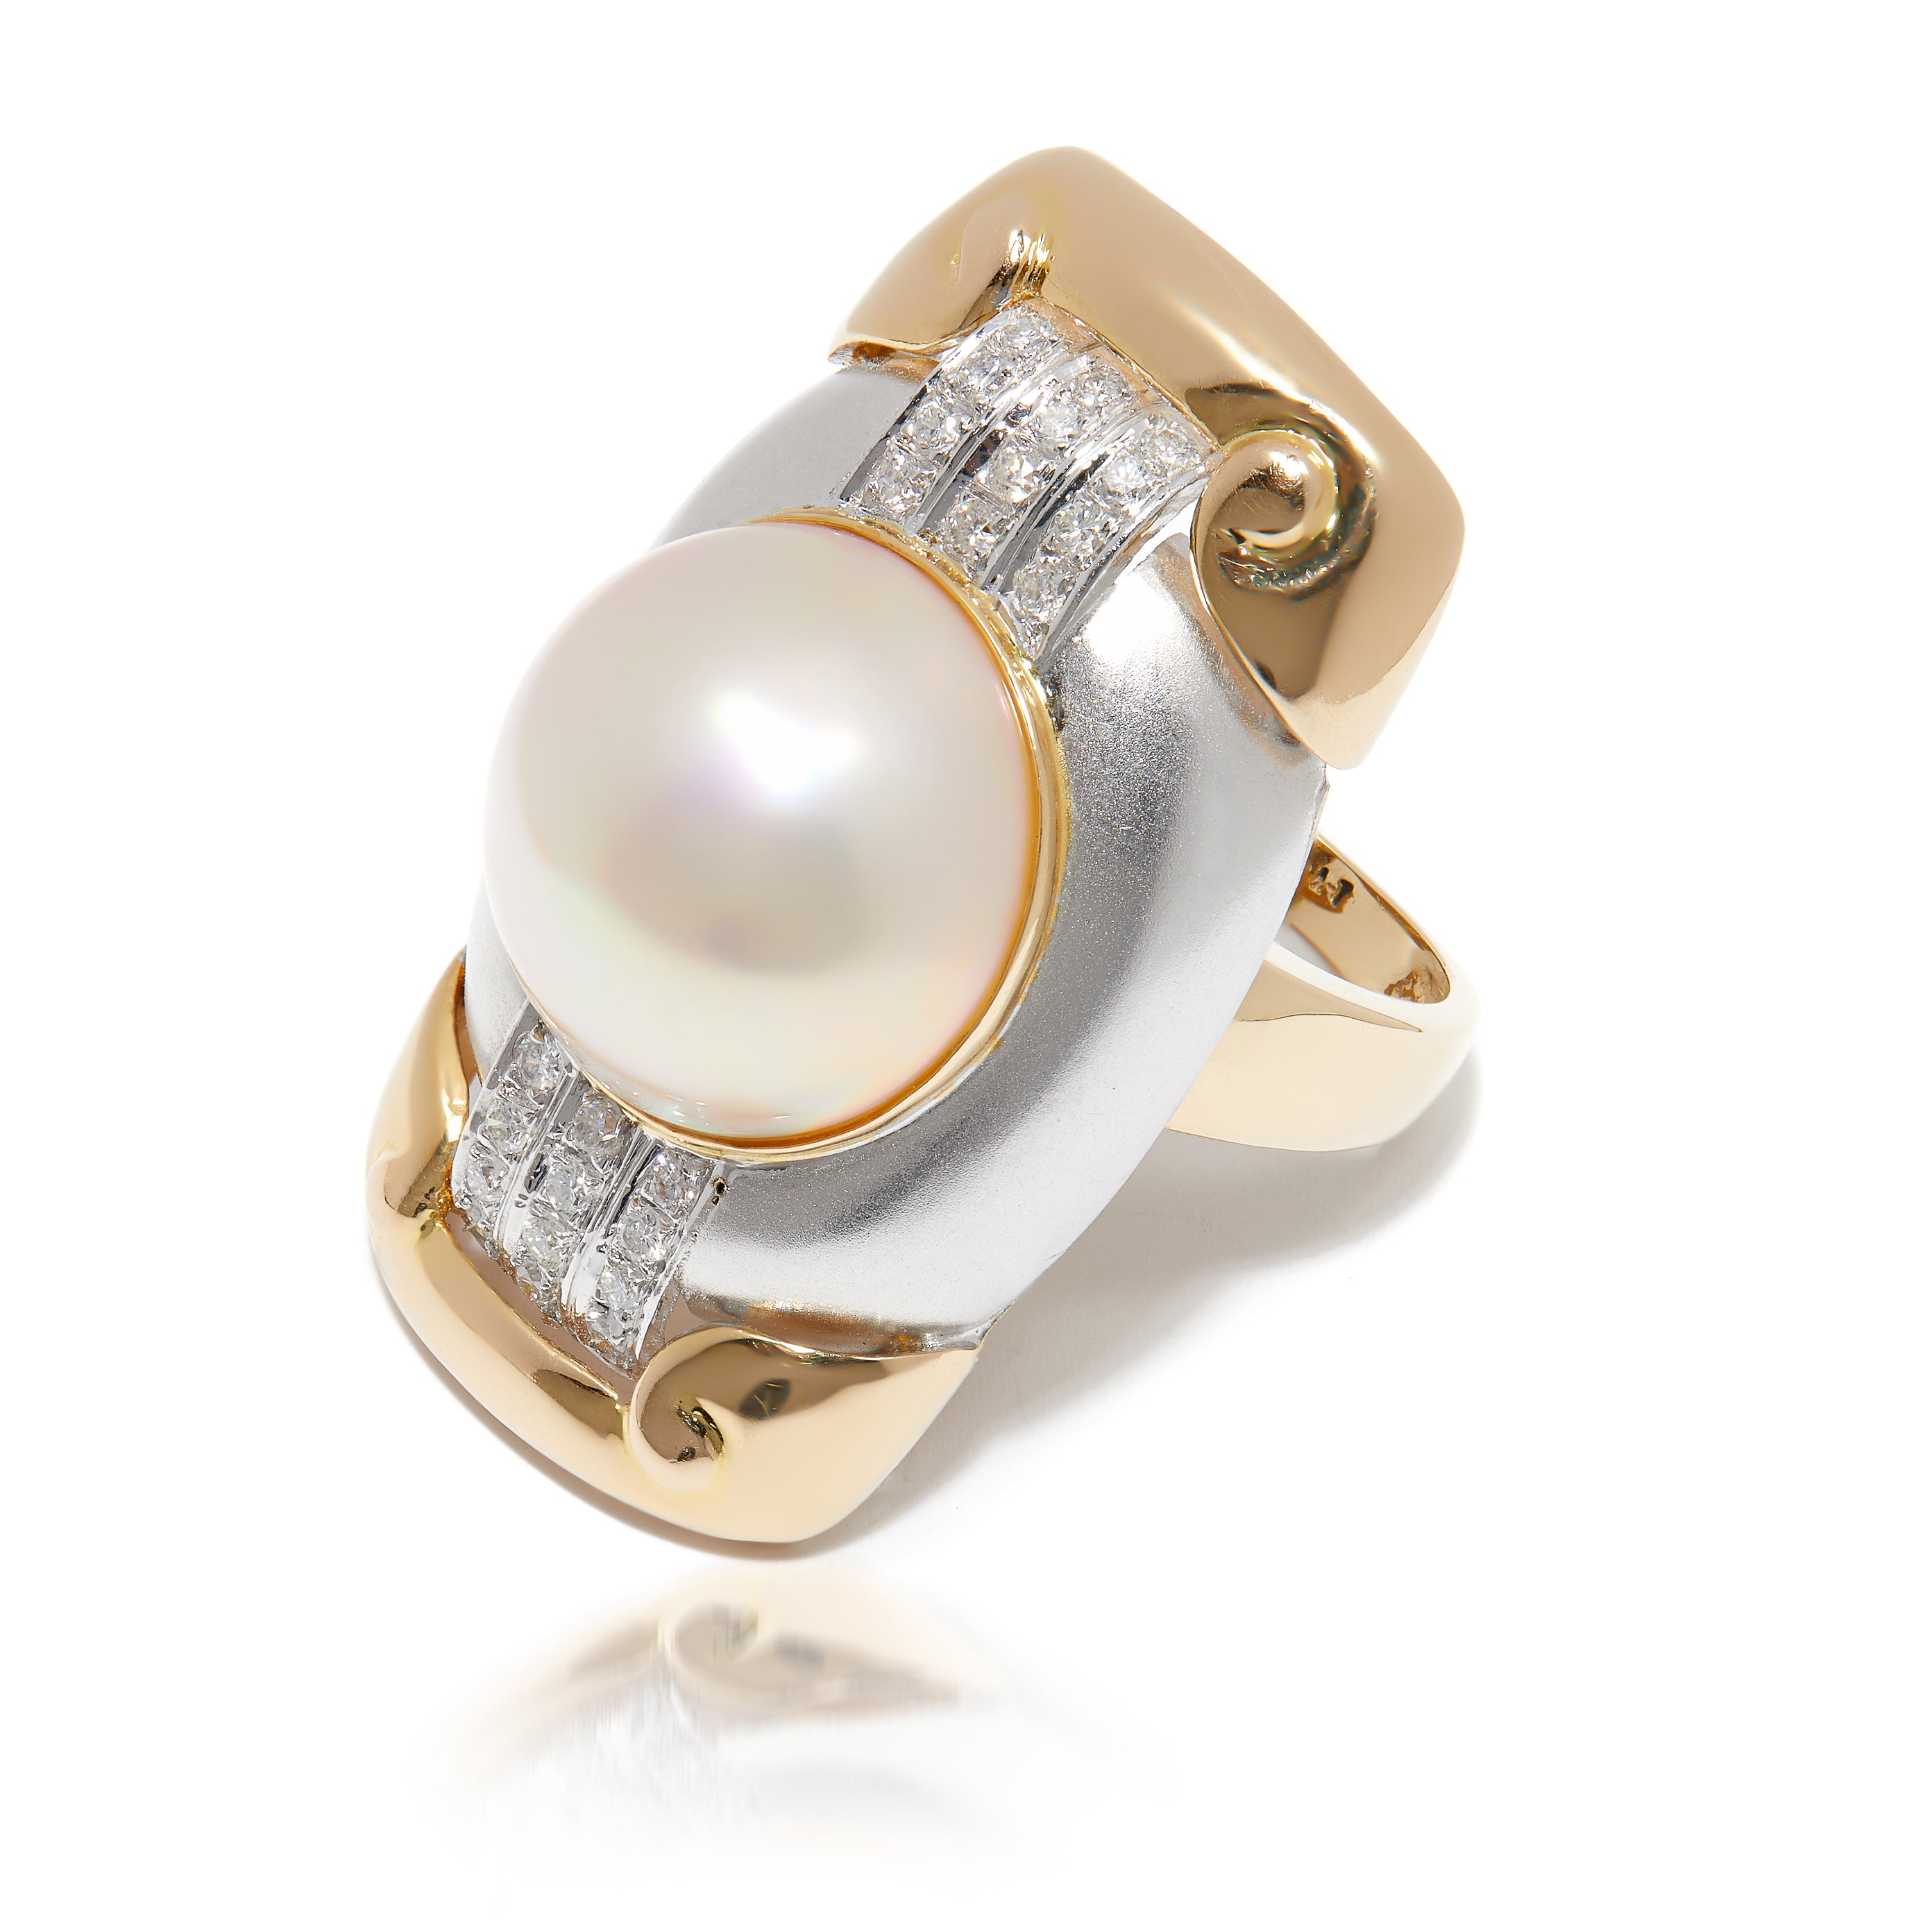 Elongated two-tone gold pearl ring with diamond accents.